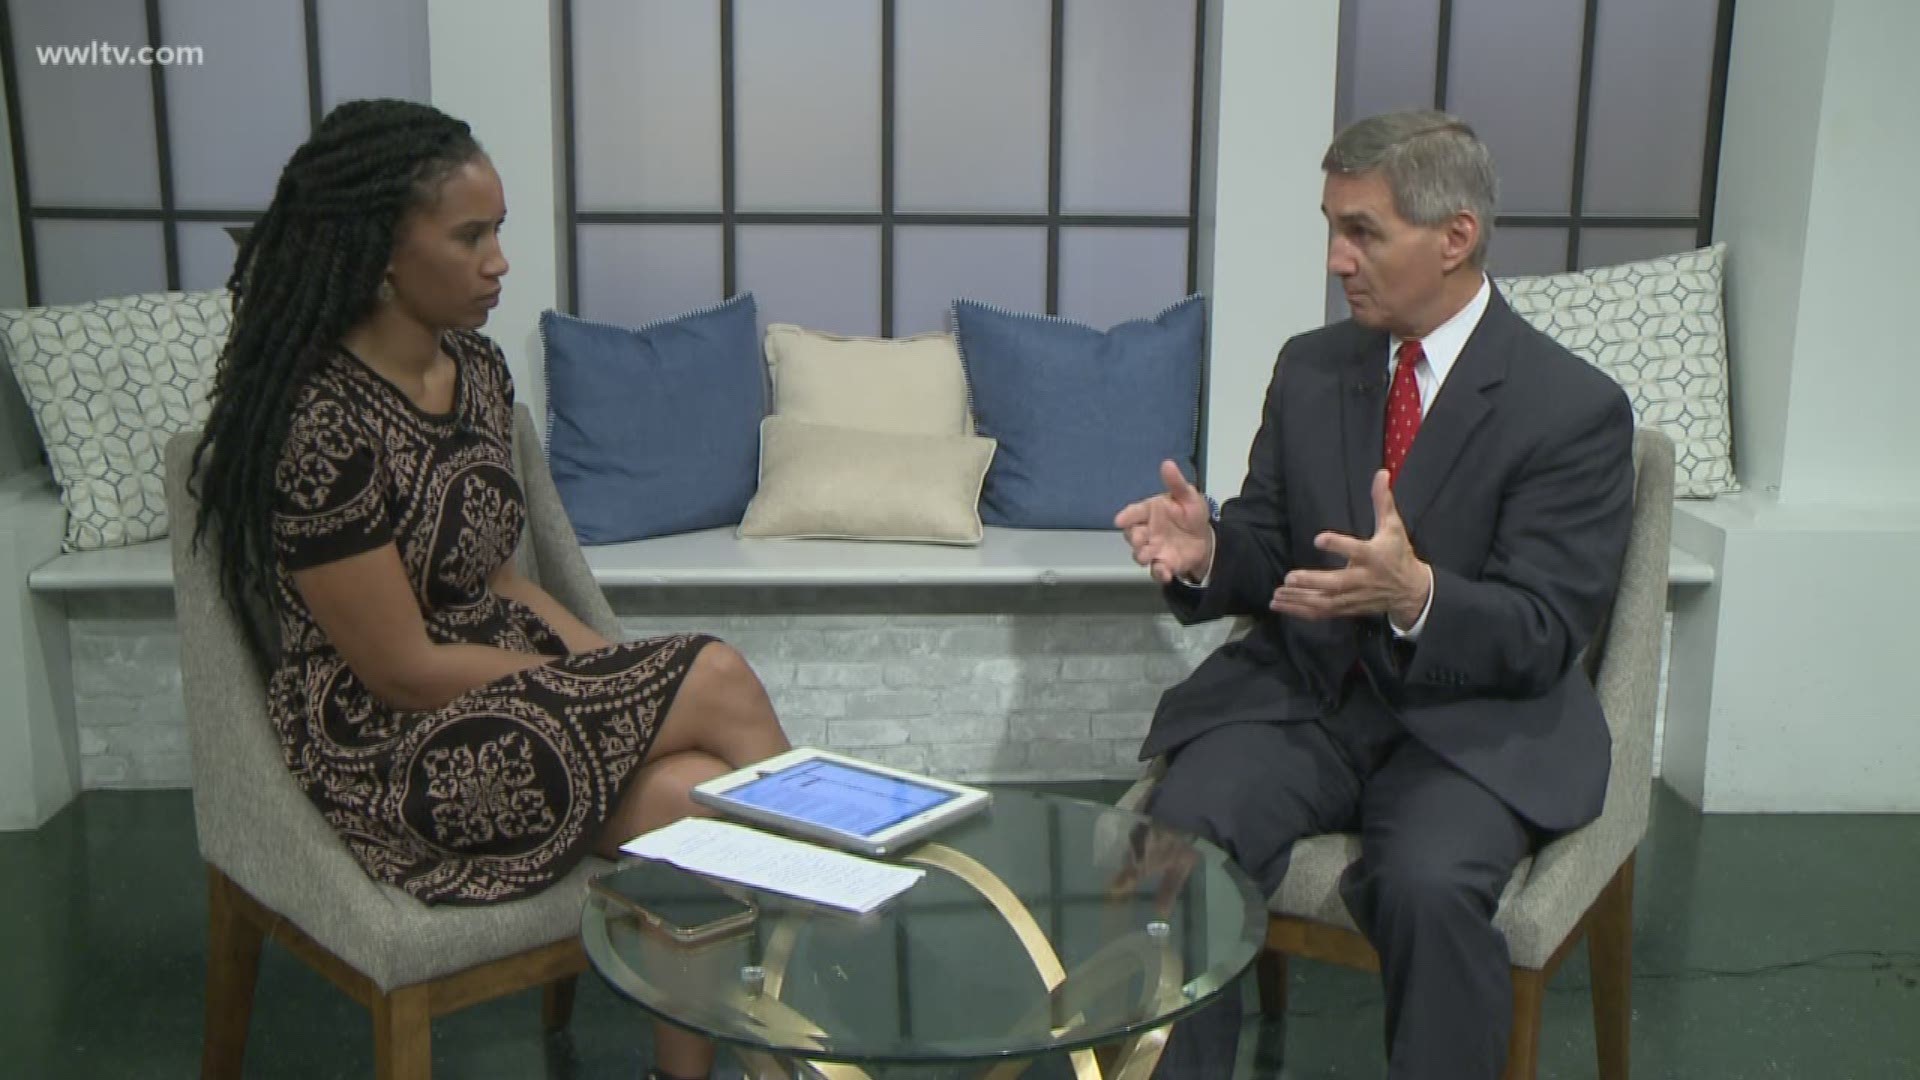 N.O. District Attorney Leon Cannizzaro joins us to discuss the new Juvenile Court policy for repeat teen offenders.